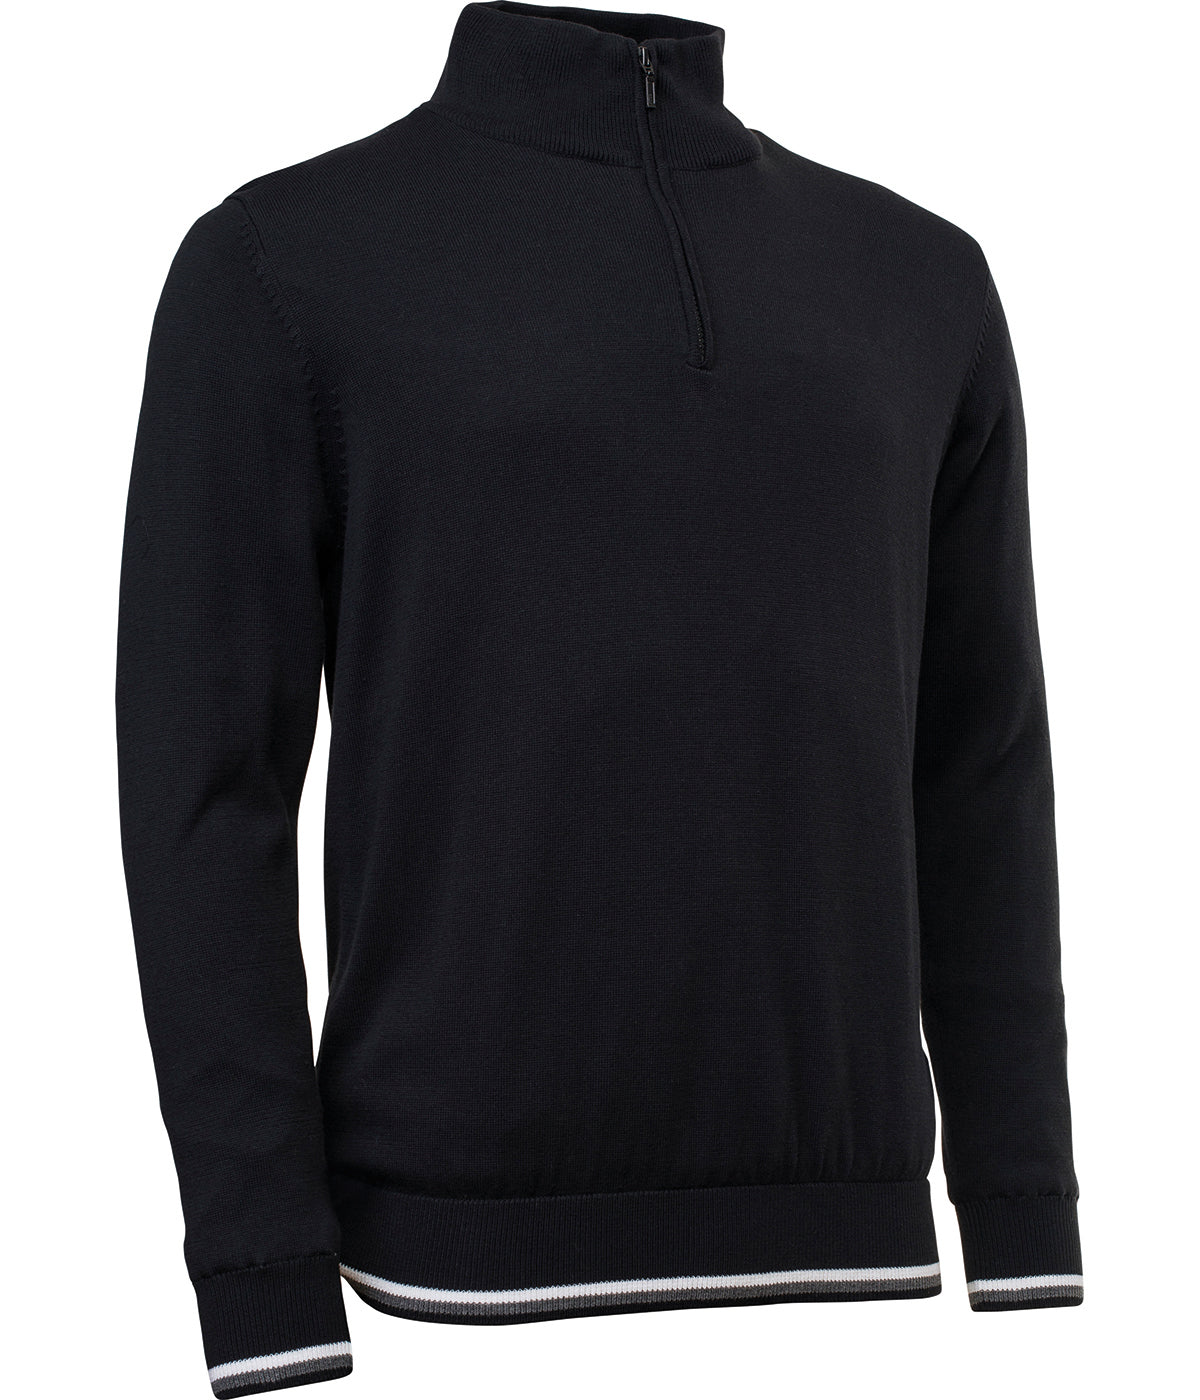 Mens Dubson wind stop pullover - Mercantile Mountain